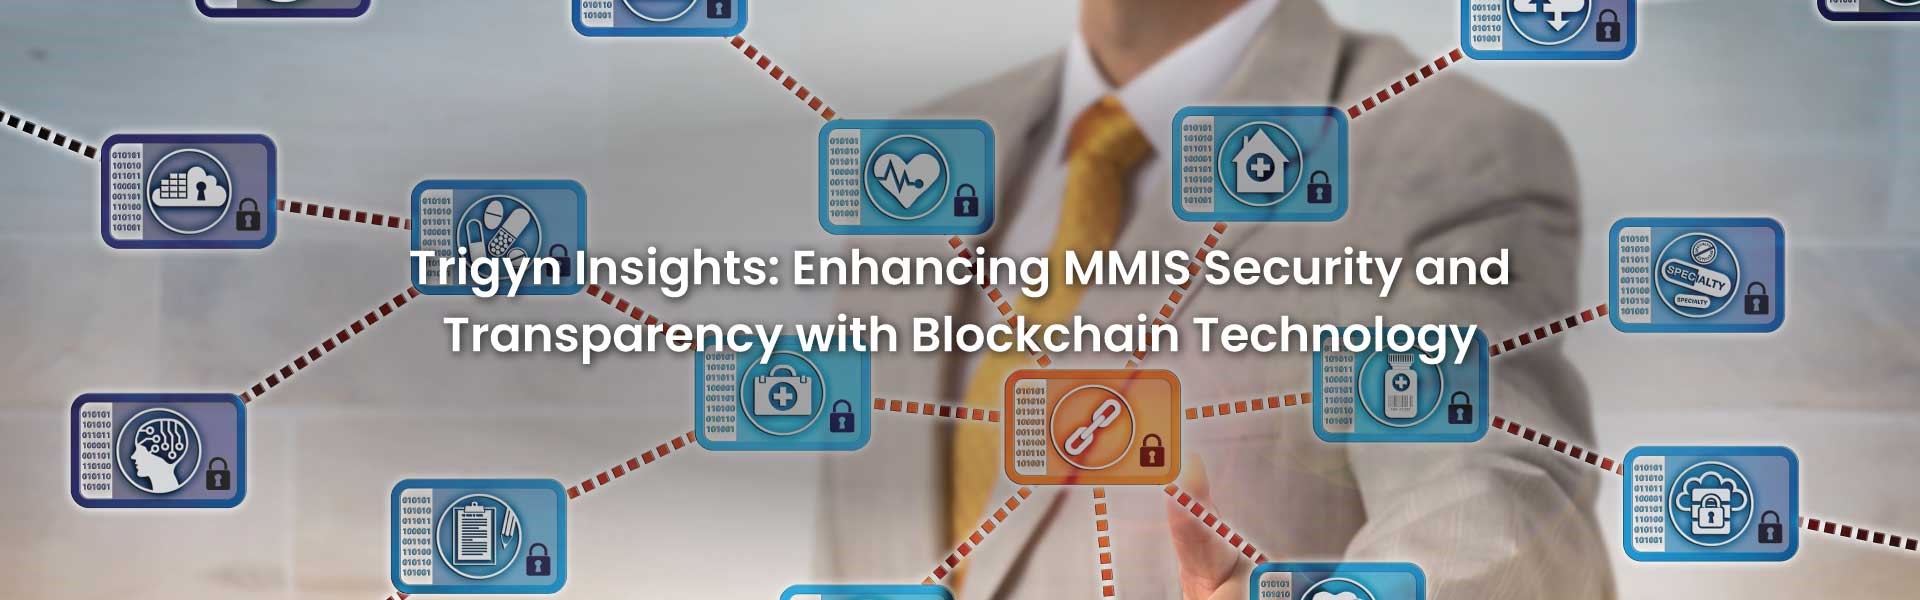 MMIS Security and Transparency with Blockchain